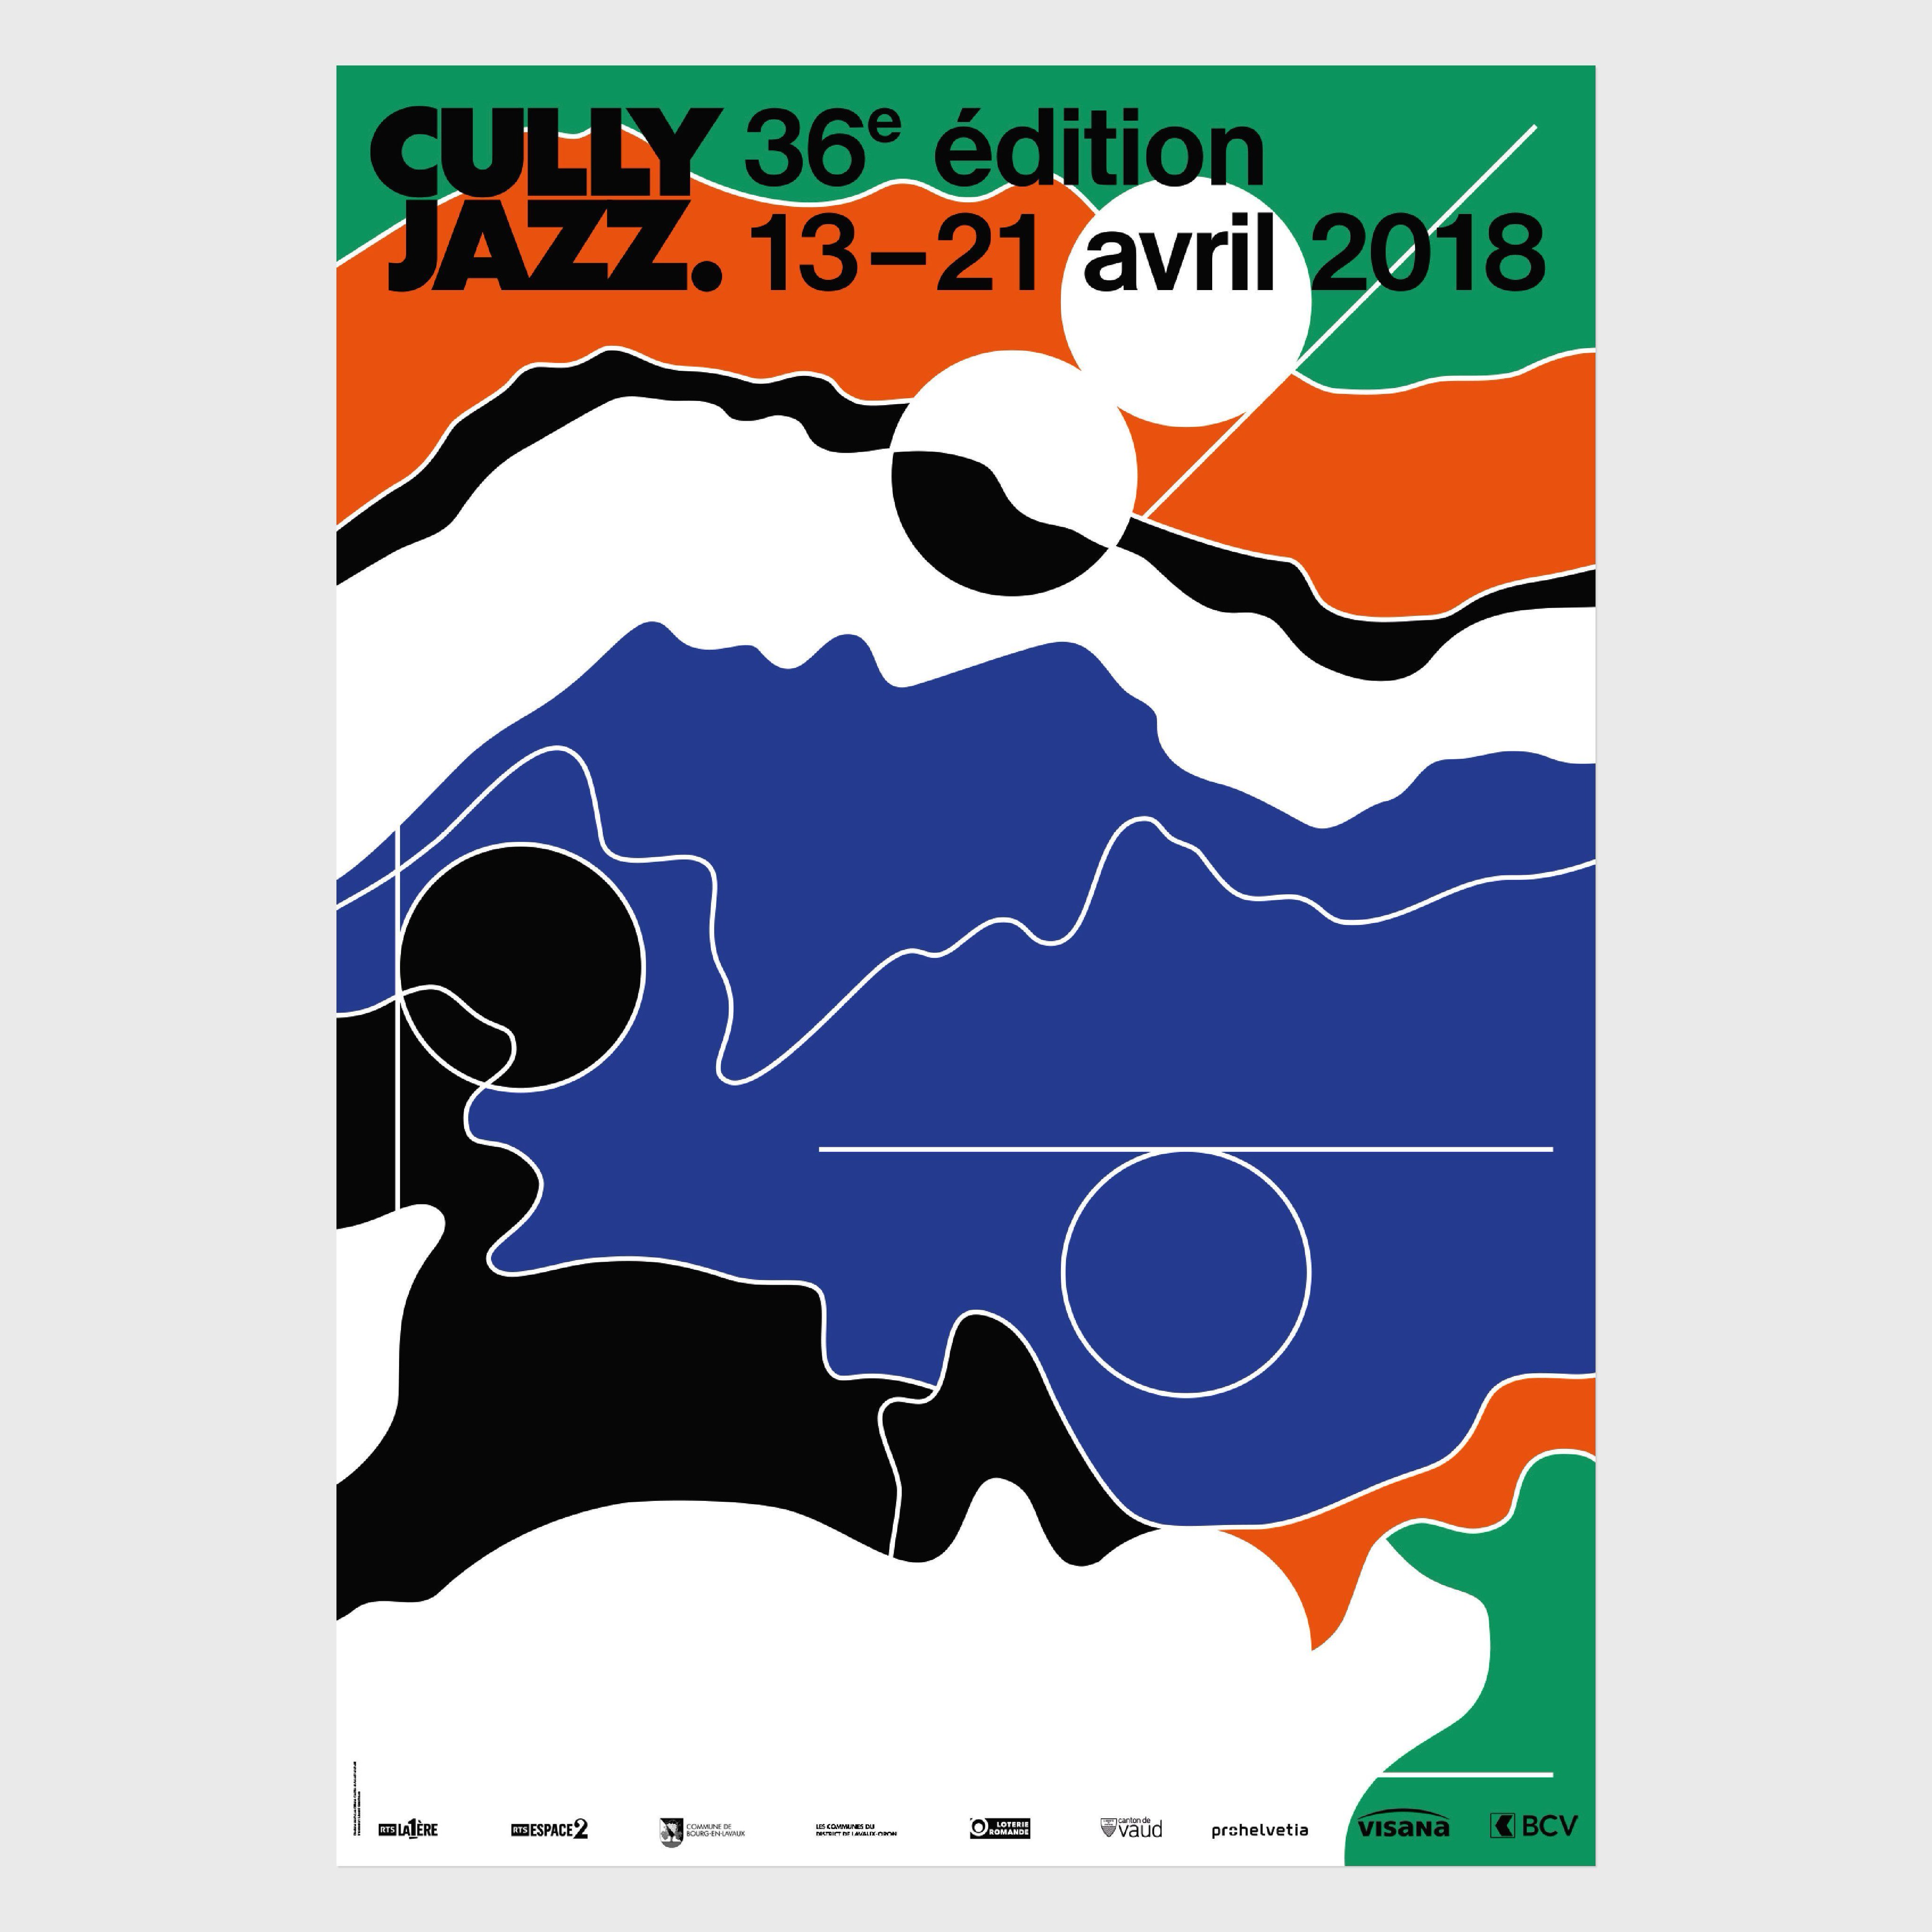 forbruge røg Tårer INTL on Twitter: "International Poster Competition submission ❗️⠀⠀ Title:  Cully Jazz Festival 2018 By: Alice Franchetti &amp; Giliane Cachin Country:  Switzerland Get the accompanying 2018 International Poster Book:  https://t.co/mLhW2HWehF 📚 https ...